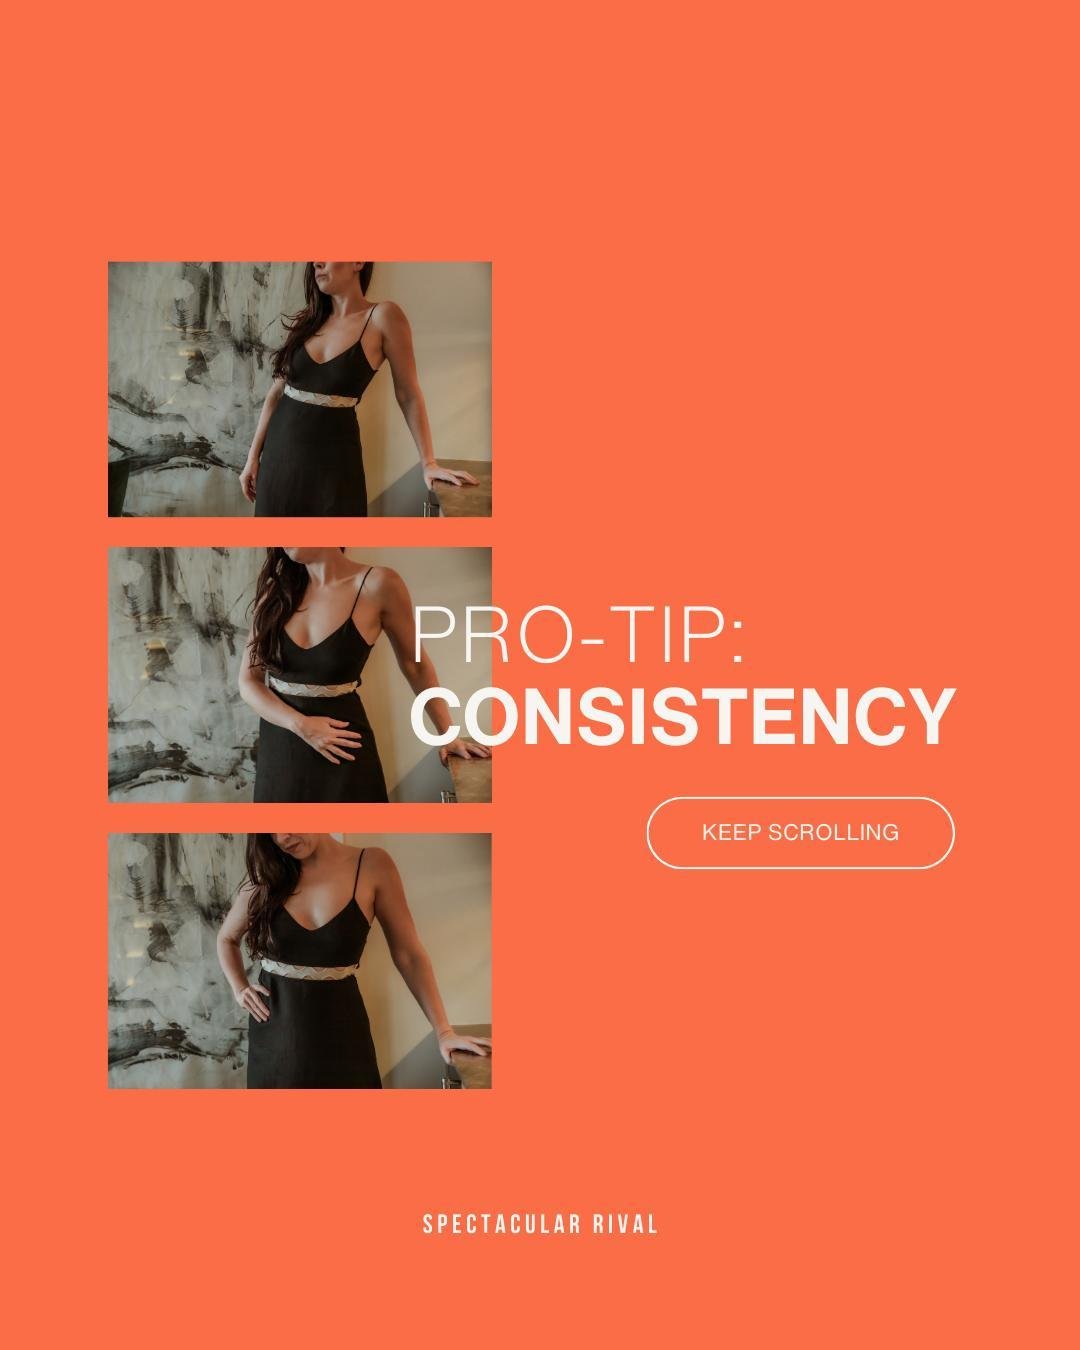 PRO TIP: Consistency is key when it comes to social media success. By maintaining a regular posting schedule, you can witness your audience expand! ⁠
⁠
Need help staying on track? I&rsquo;ve got your back. ⁠
⁠
At Spectacular Rival, I understand the i